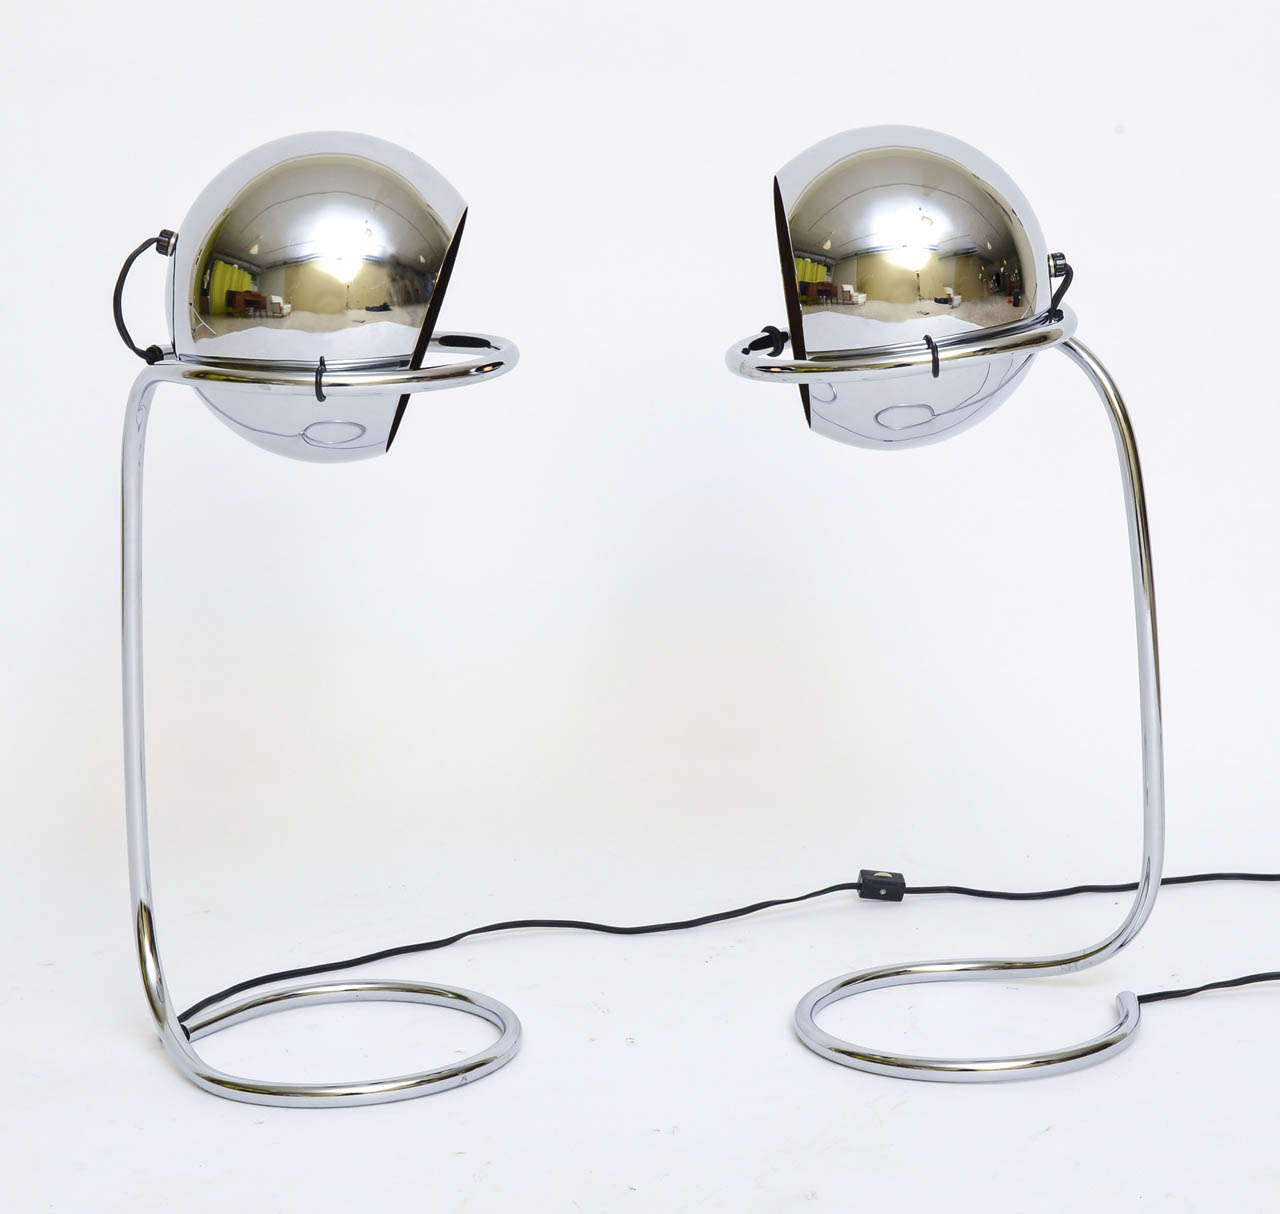 Rising on curling tubular chrome stands, this pair of chrome ball lights are very Panton inspired. with movable heads the lamps can beam upward, down or to the sides, your move. Each takes a single medium base bulb, 75 watts max.
Price is for the